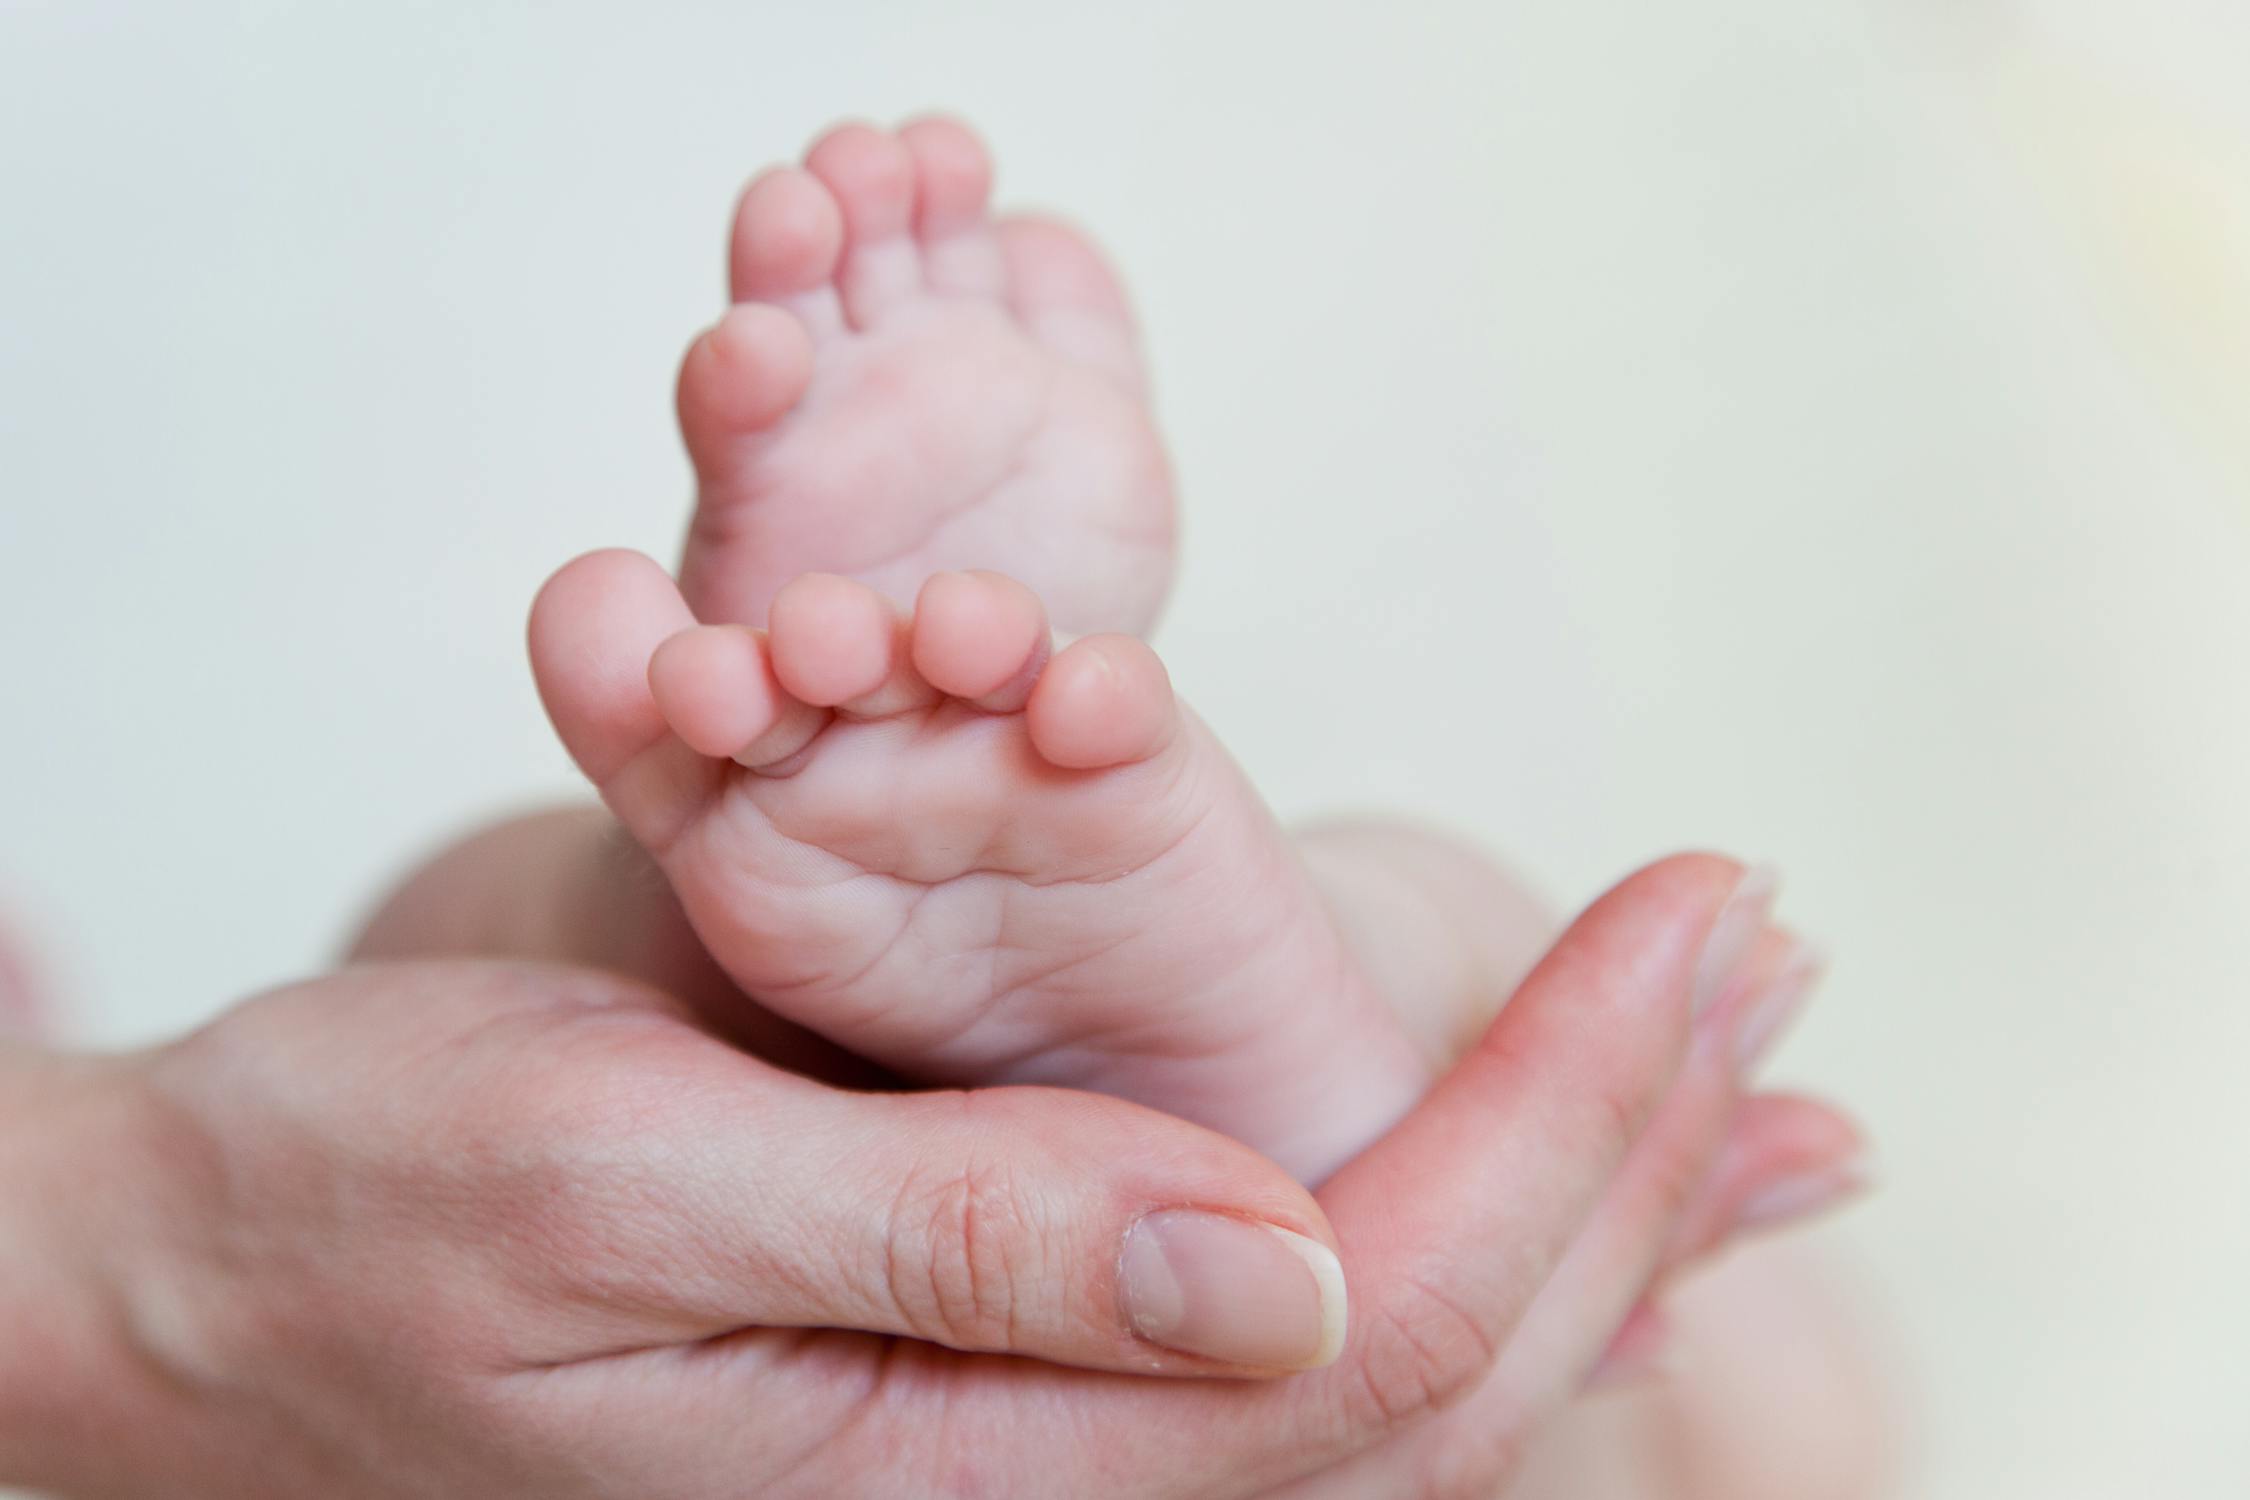 A Baby's Feet on a Person's Hand Photo by Mikhail Maslov from Pexels: https://www.pexels.com/photo/a-baby-s-feet-on-a-person-s-hand-6902334/